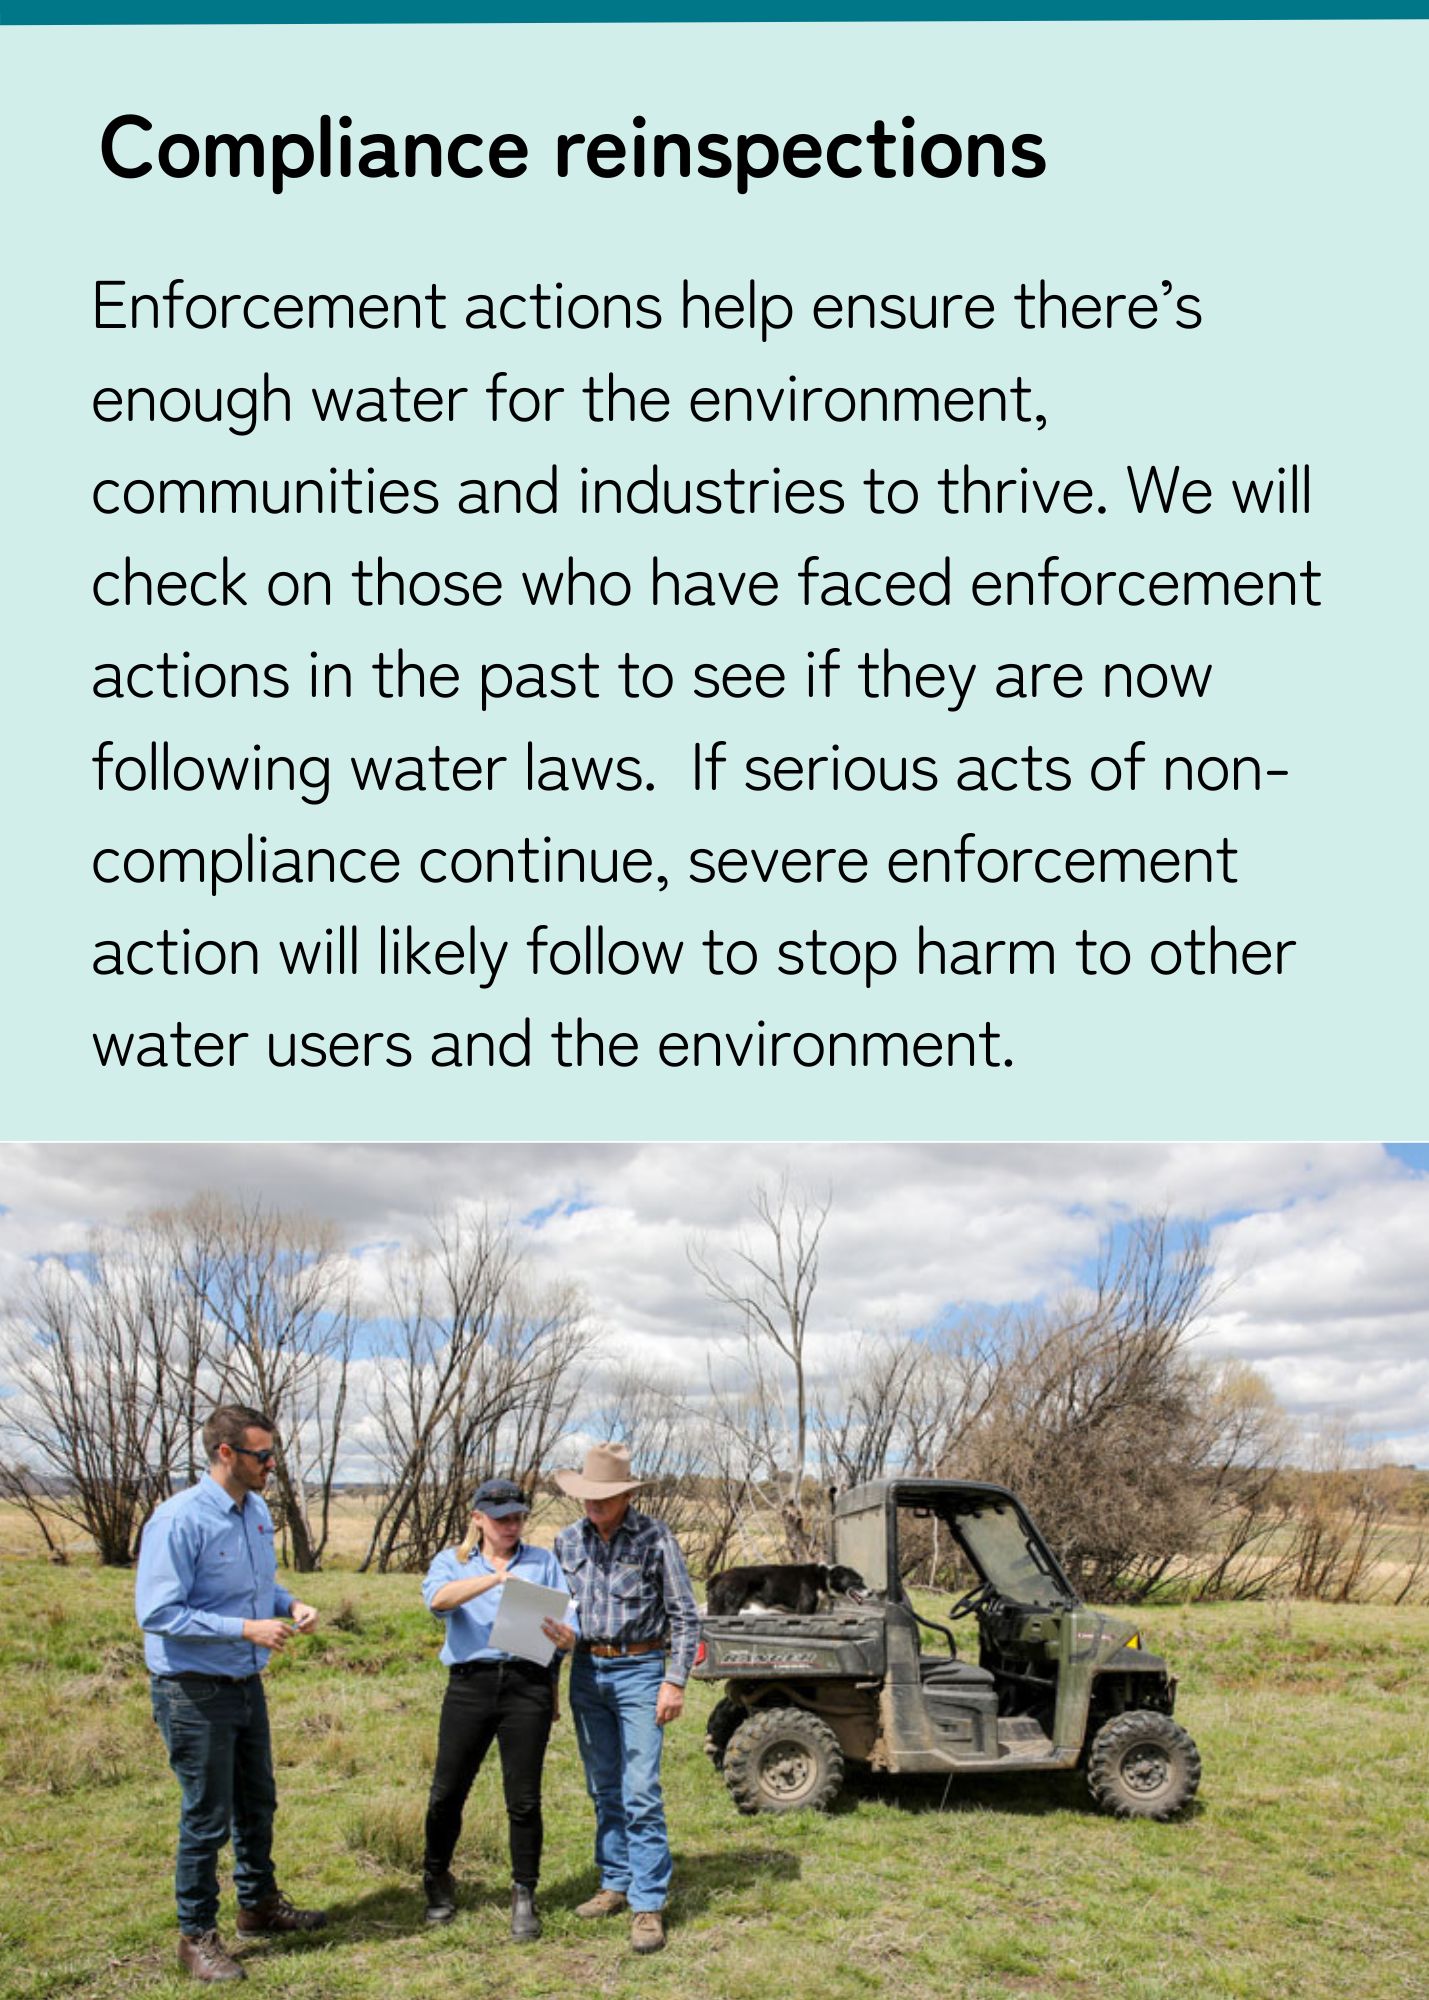 Enforcement actions help ensure there’s enough water for the environment, communities and industries to thrive. We will check on those who have faced enforcement actions in the past to see if they are now following water laws. If serious non-compliance continues, they could harm other water users and the environment.